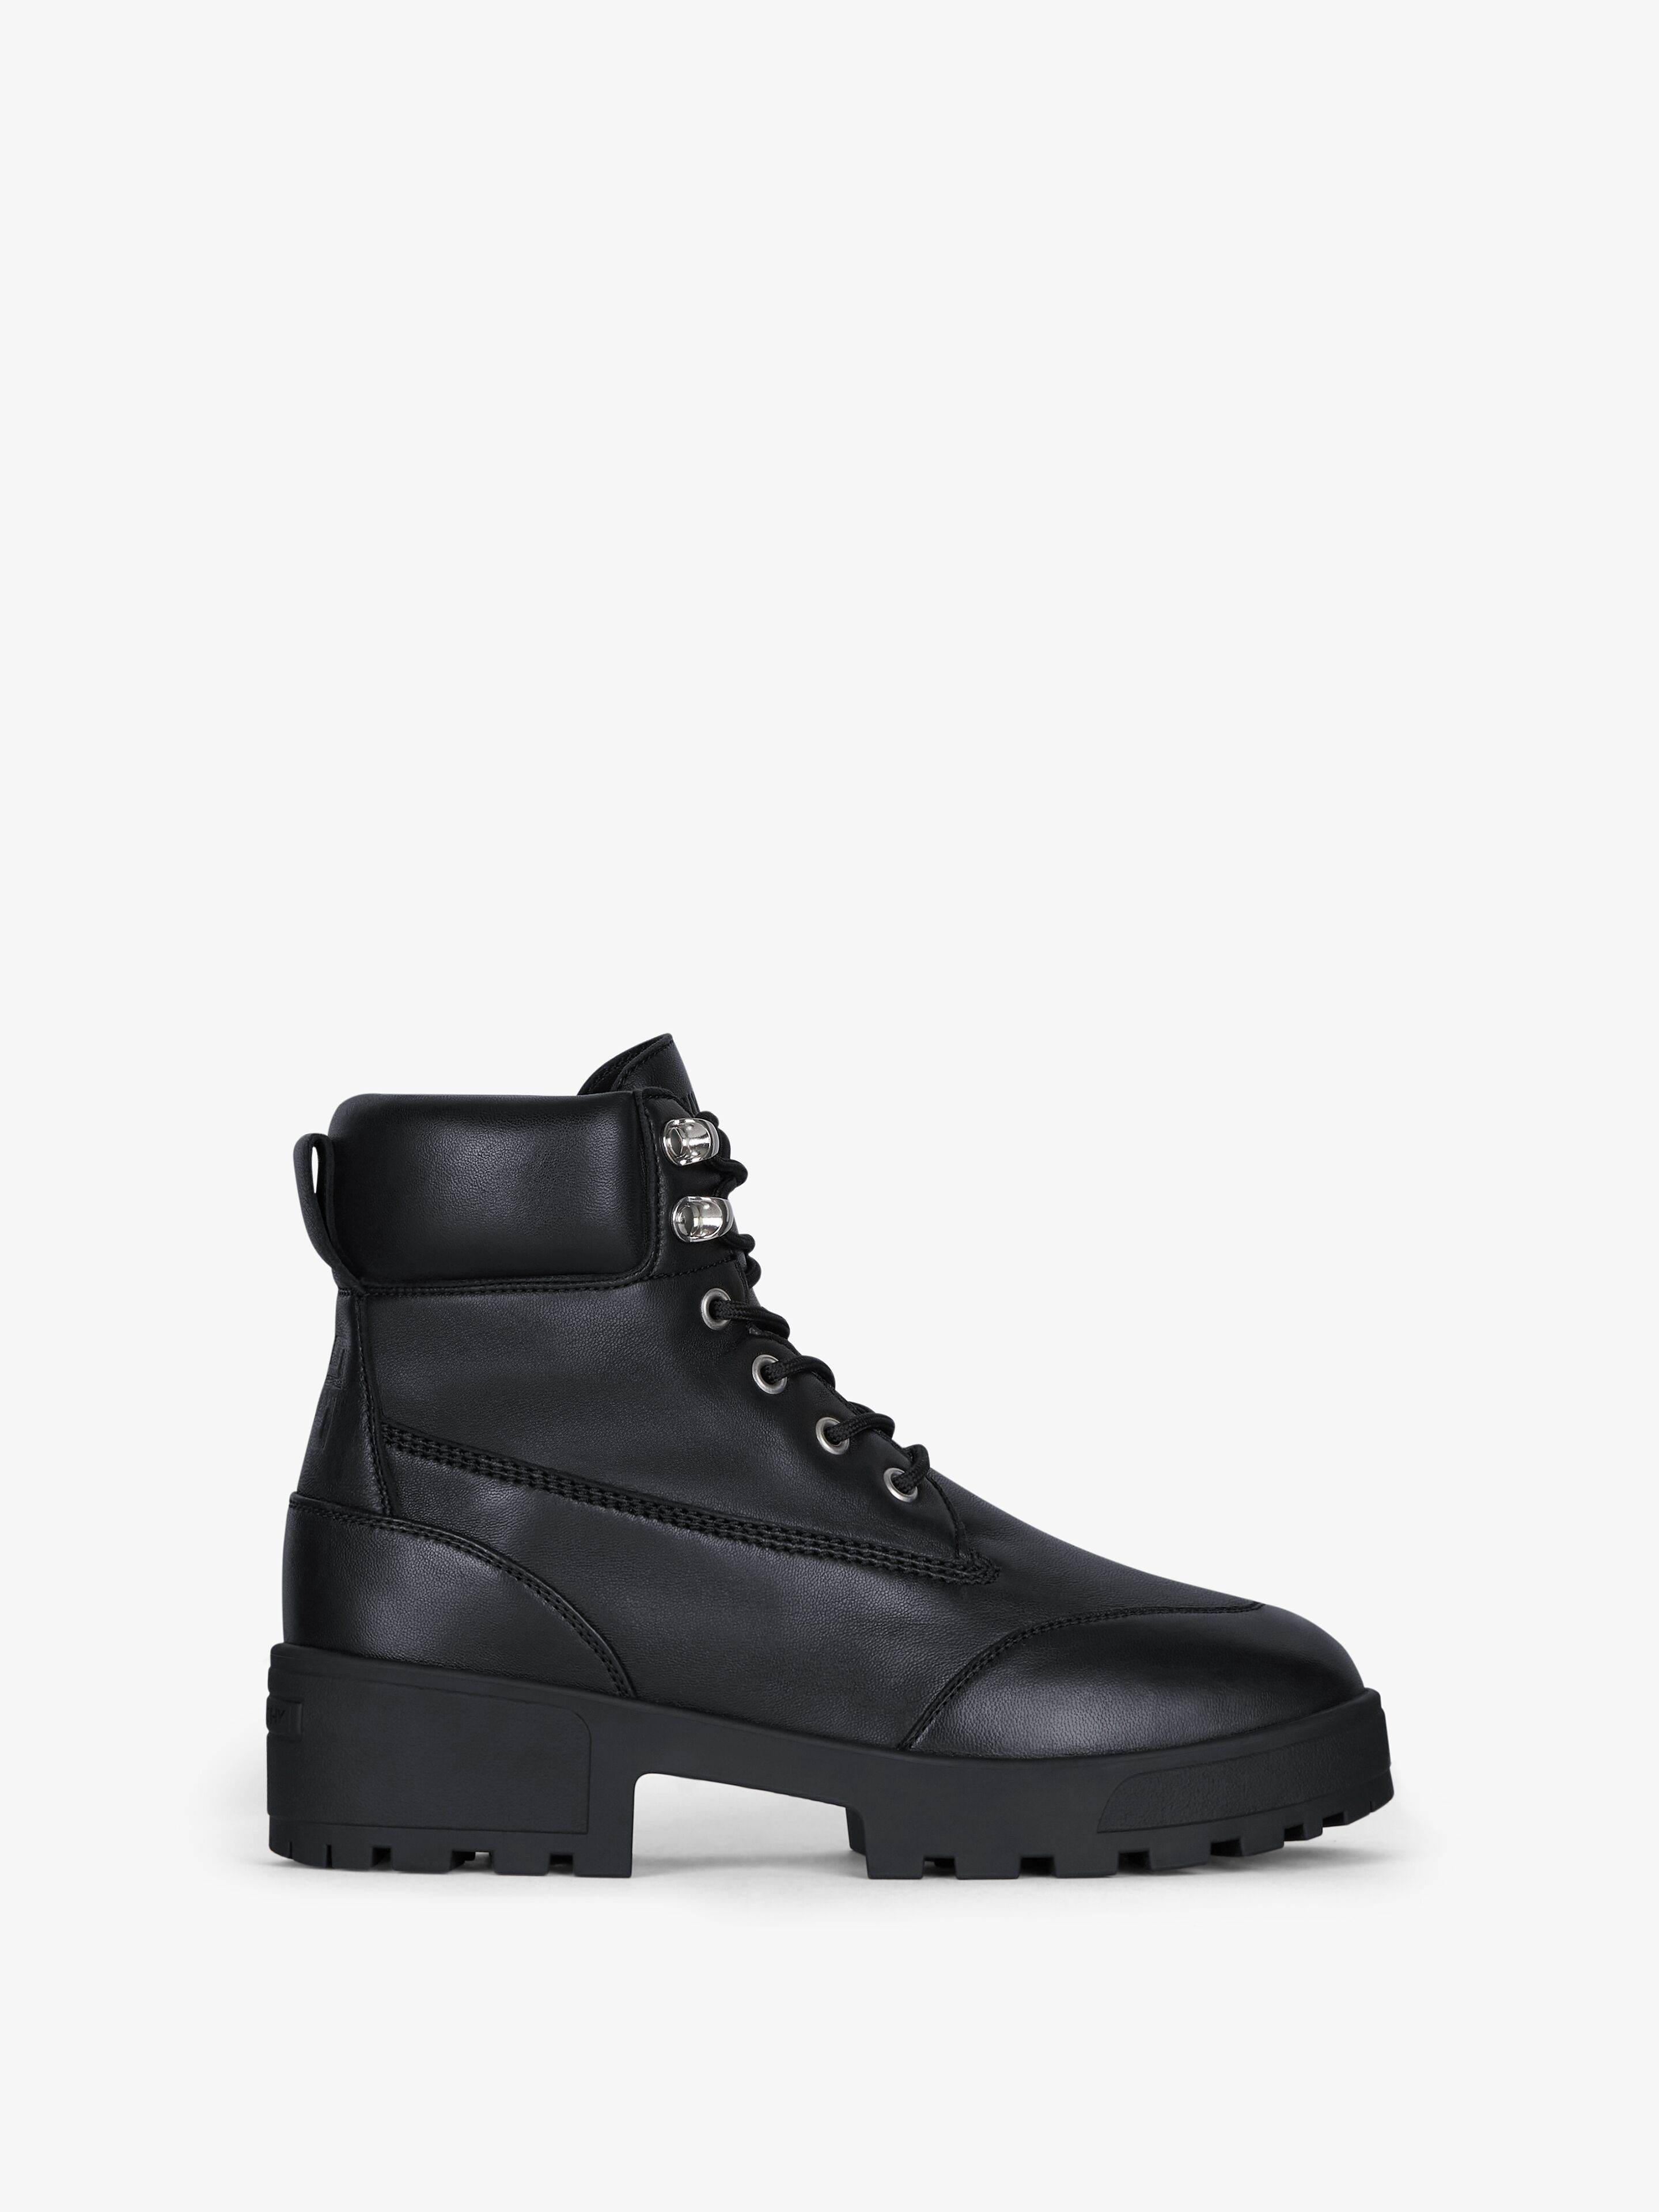 GIVENCHY TREKKER ANKLE WORKBOOTS IN LEATHER